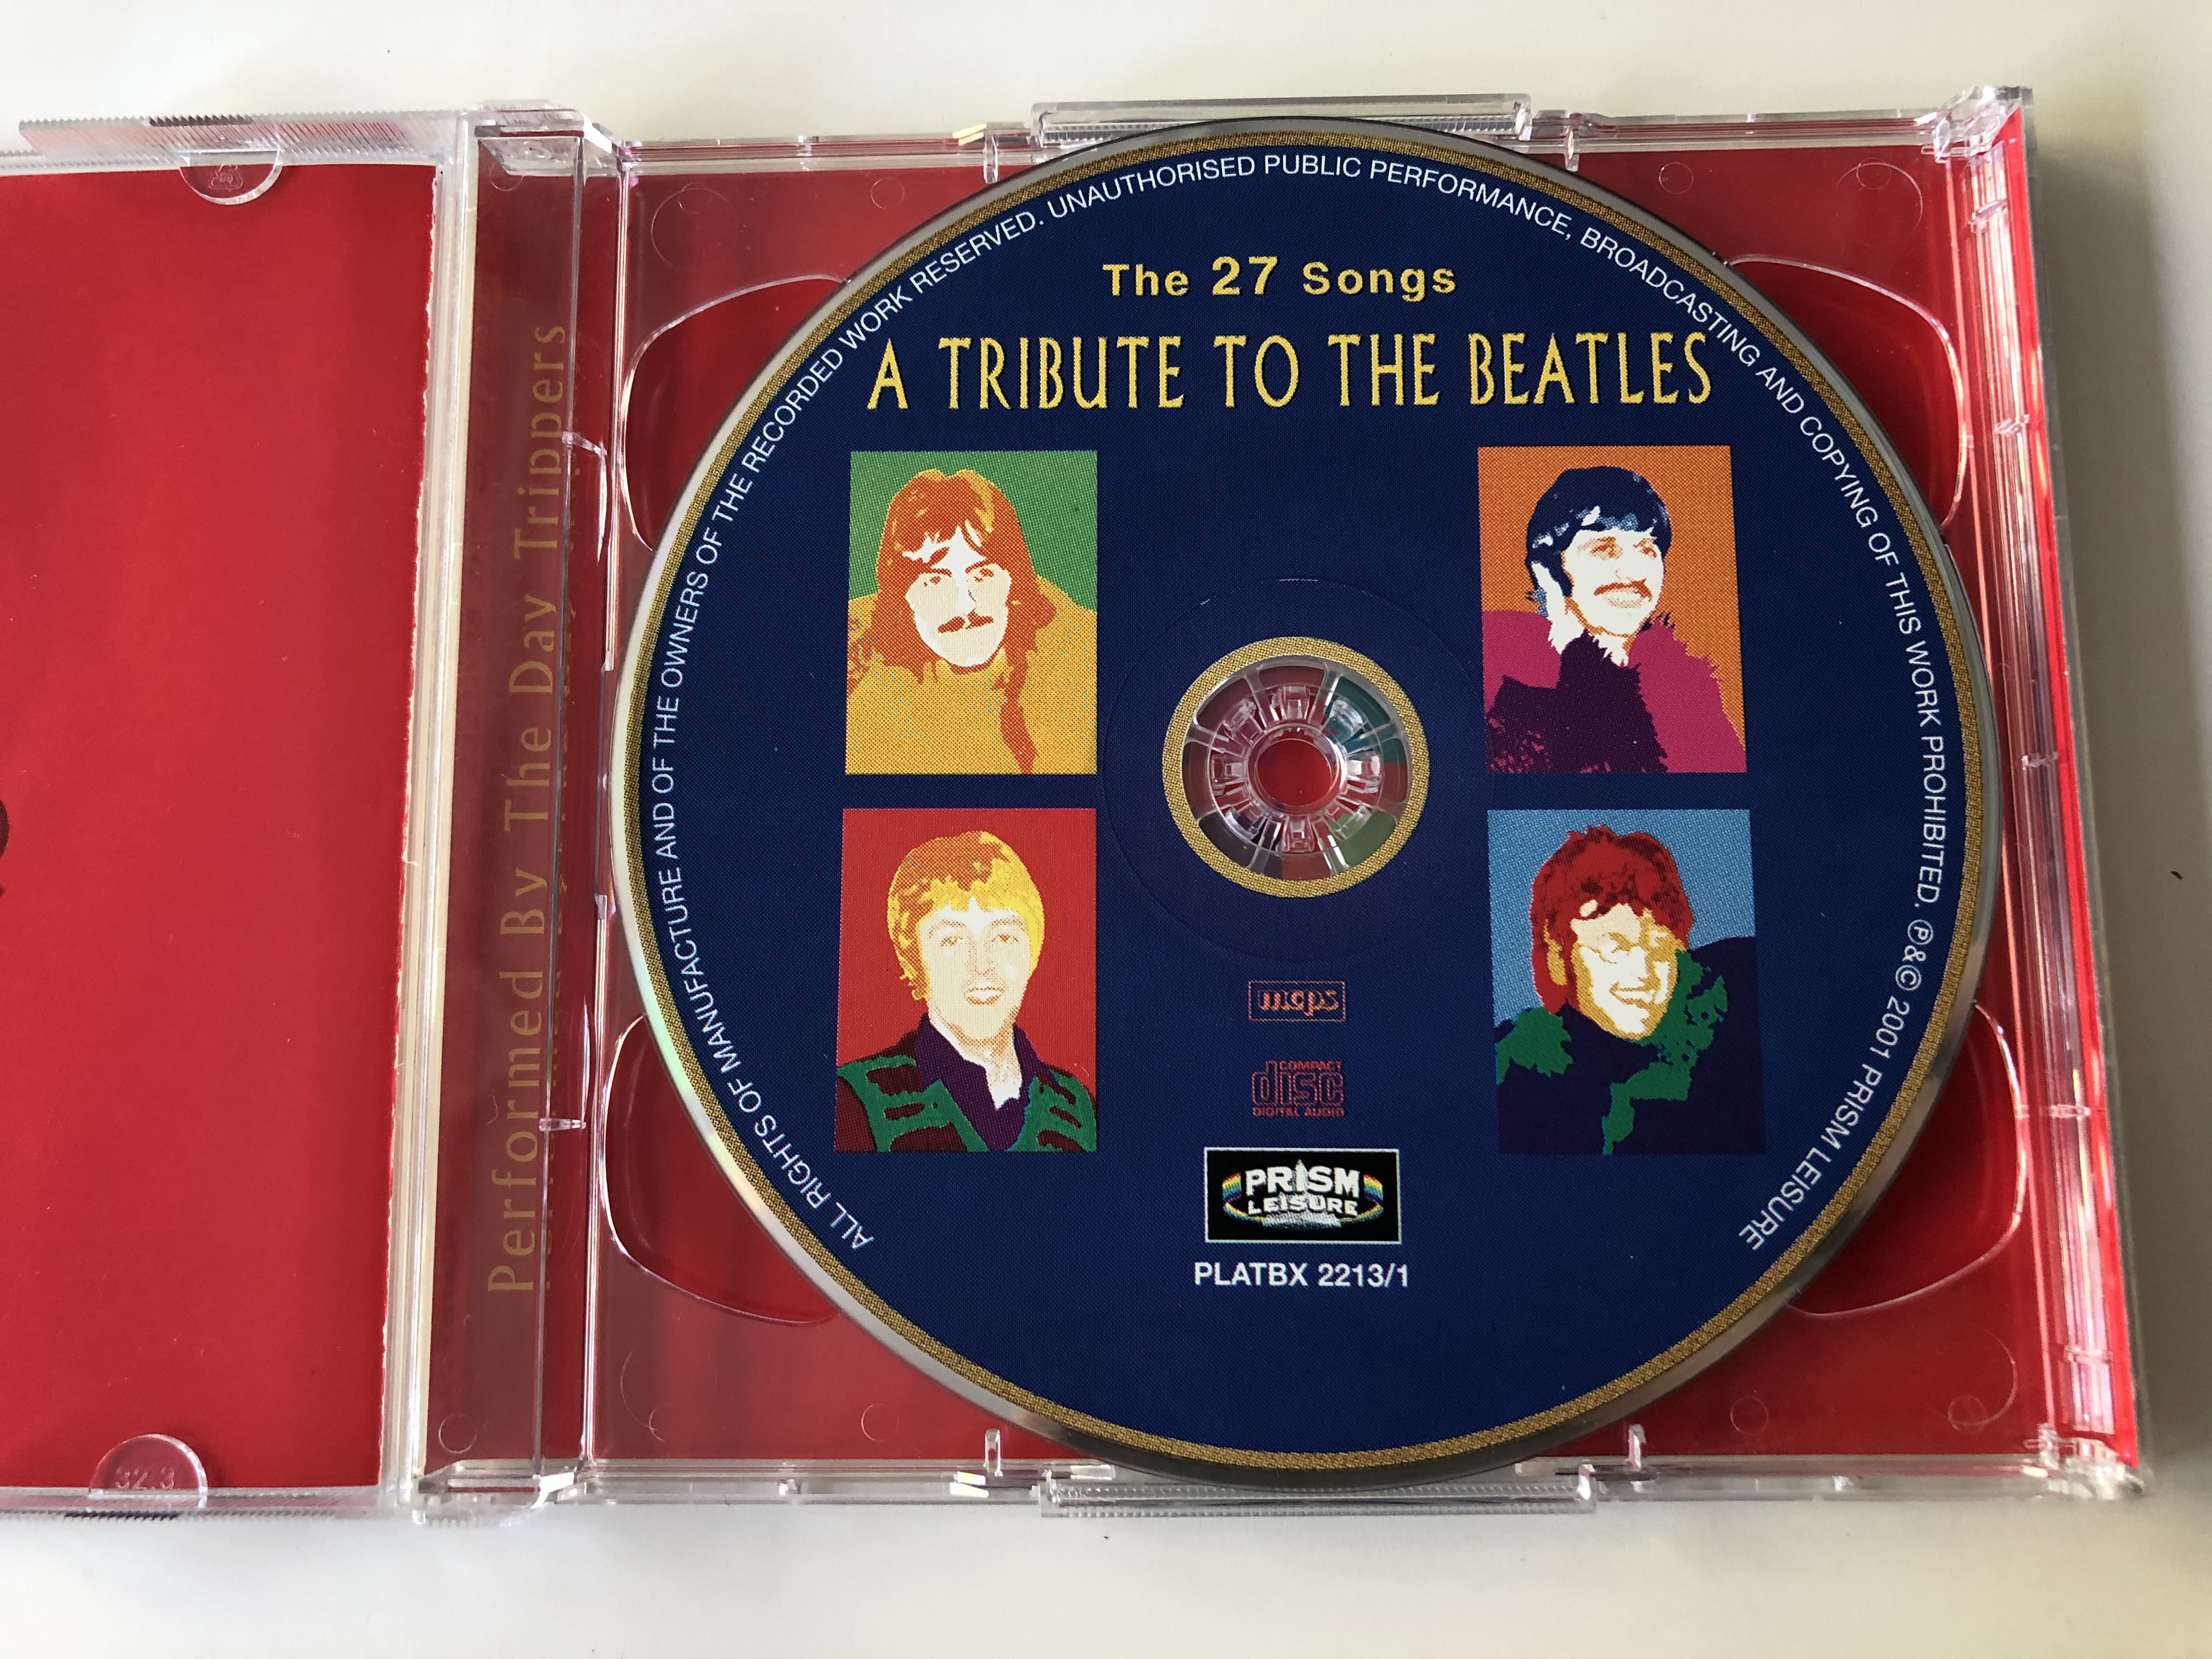 a-tribute-to-the-beatles-featuring-the-27-songs-27-karaoke-versions-performed-by-the-day-trippers-prism-leisure-2x-audio-cd-2001-platbx-2213-4-.jpg